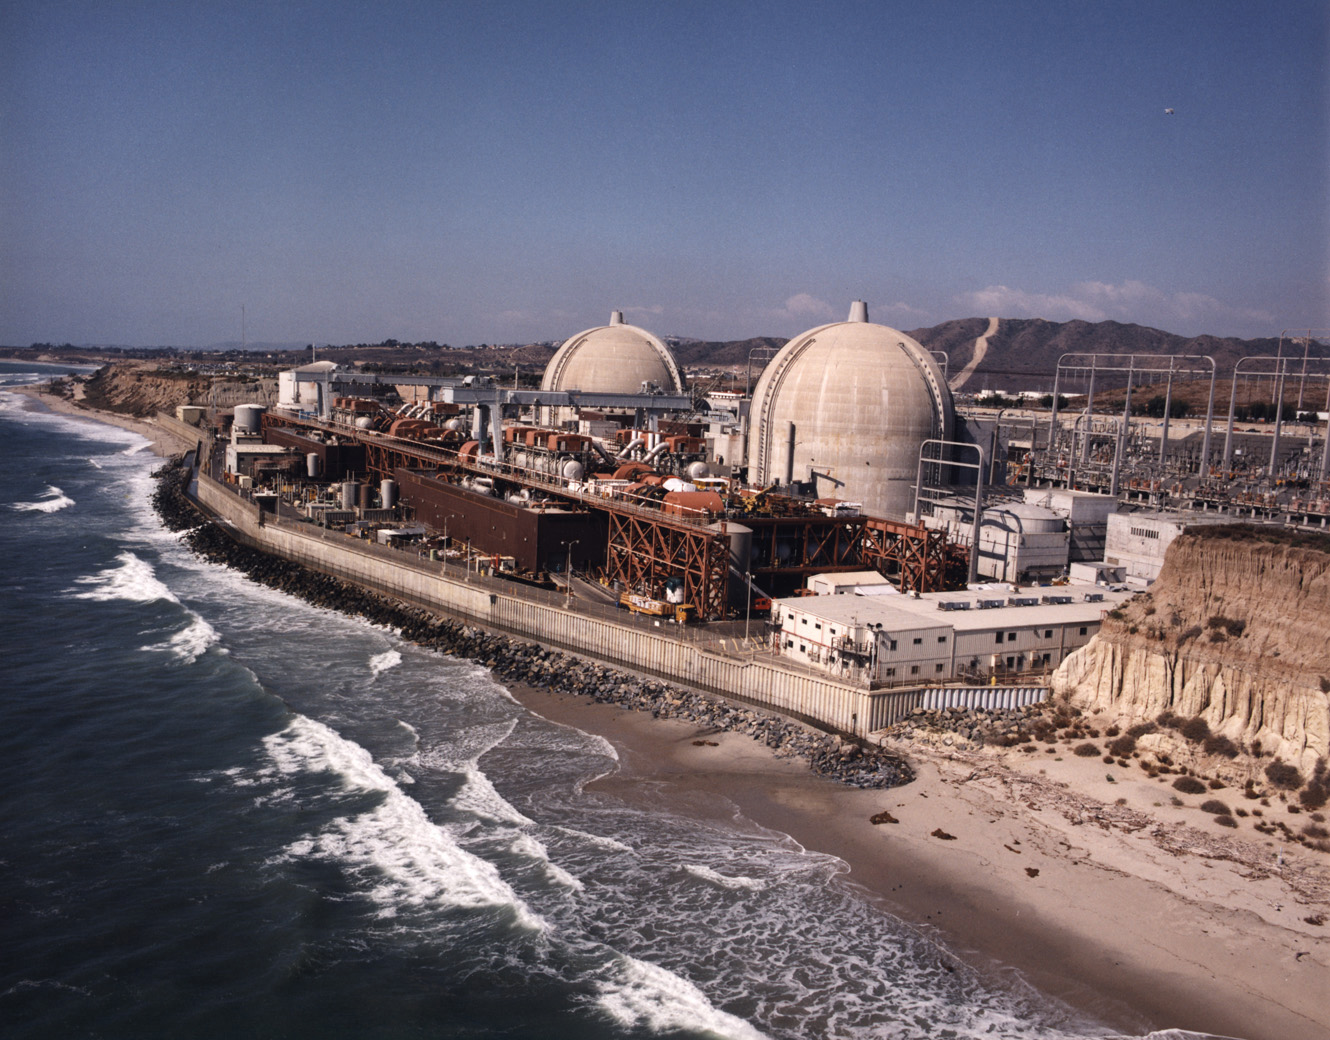 San Onofre
